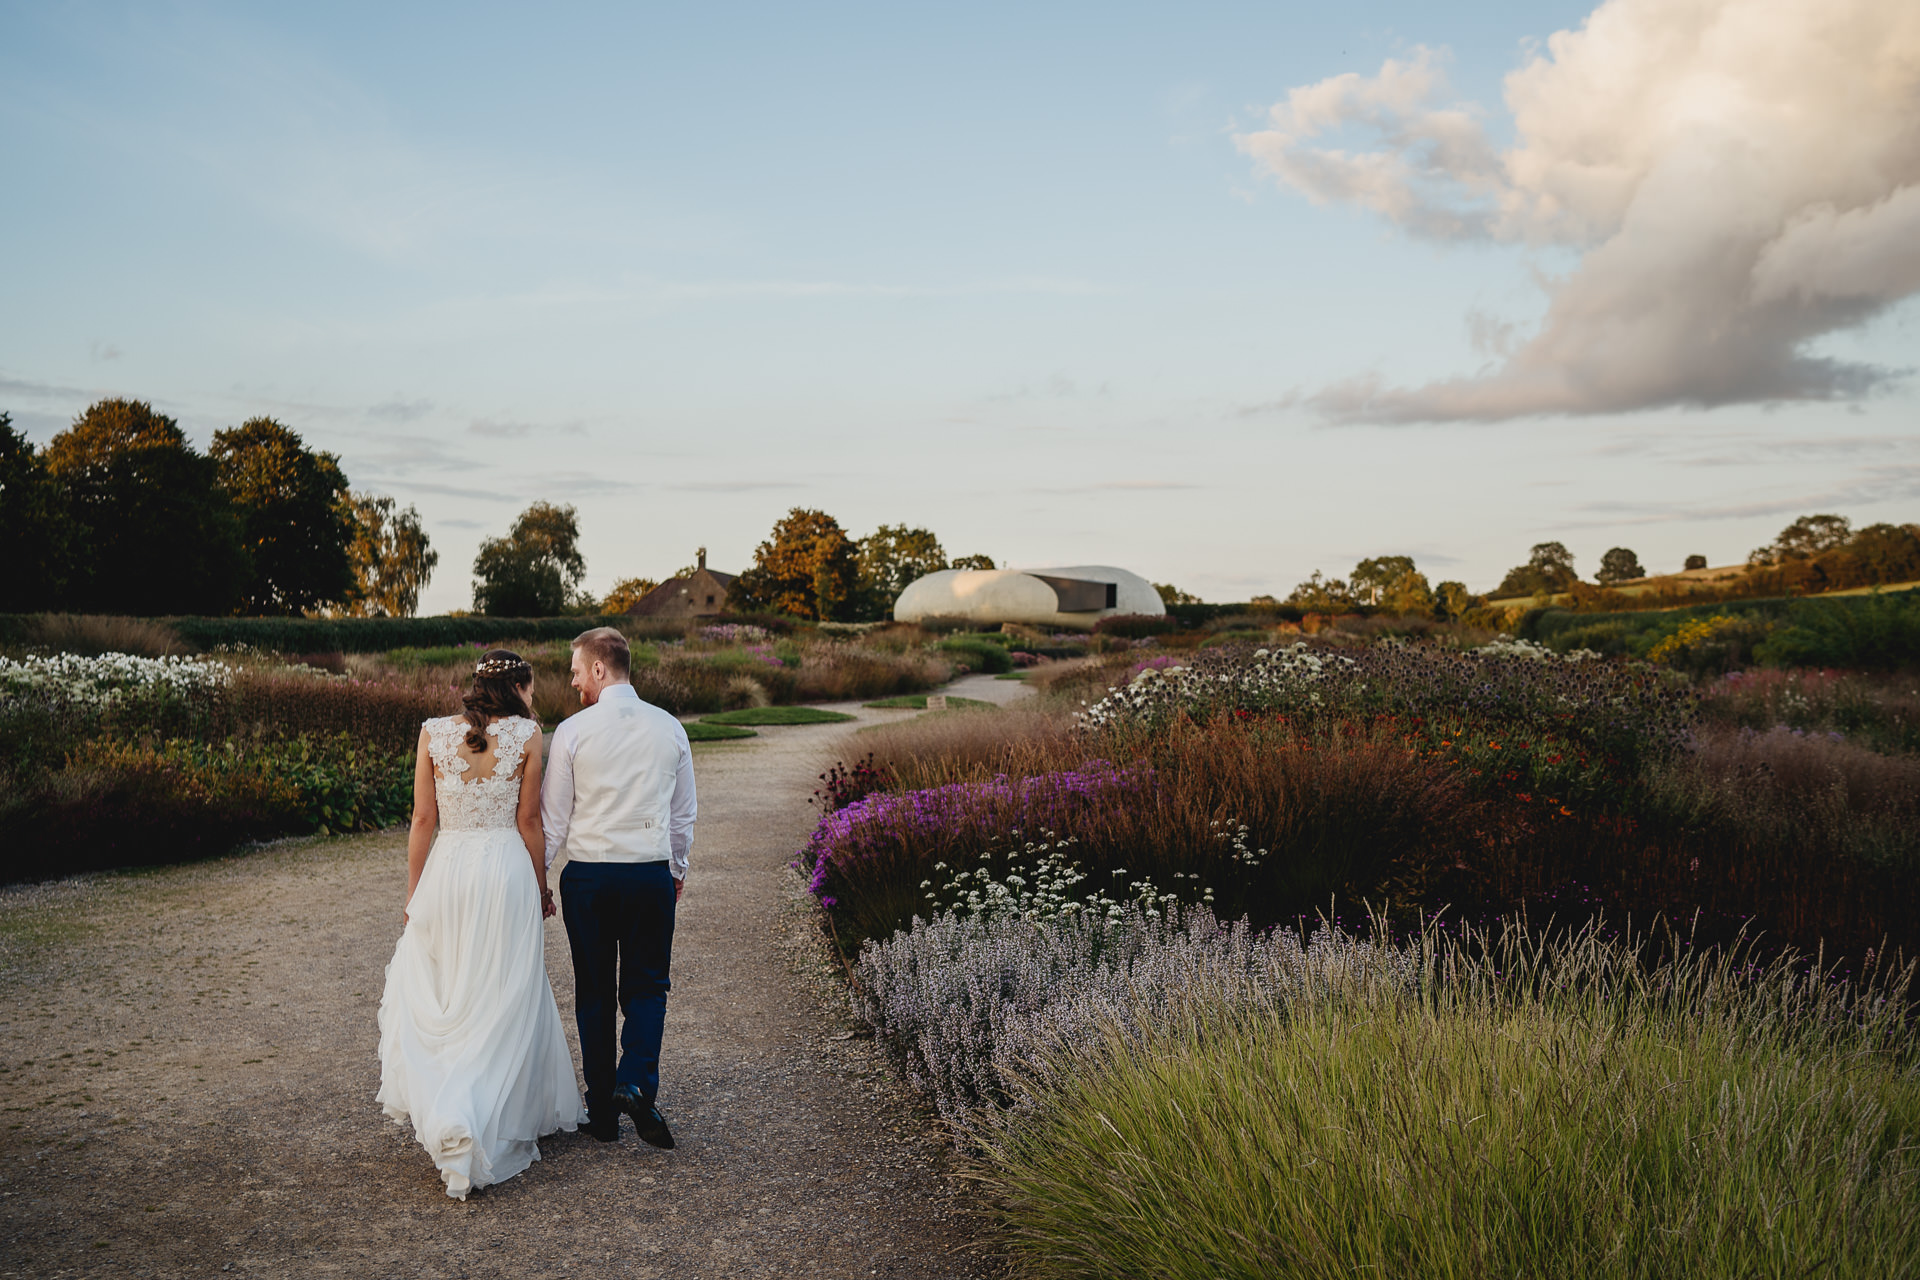 Bride and groom walking hand in hand through gardens at Hauser & Wirth Somerset